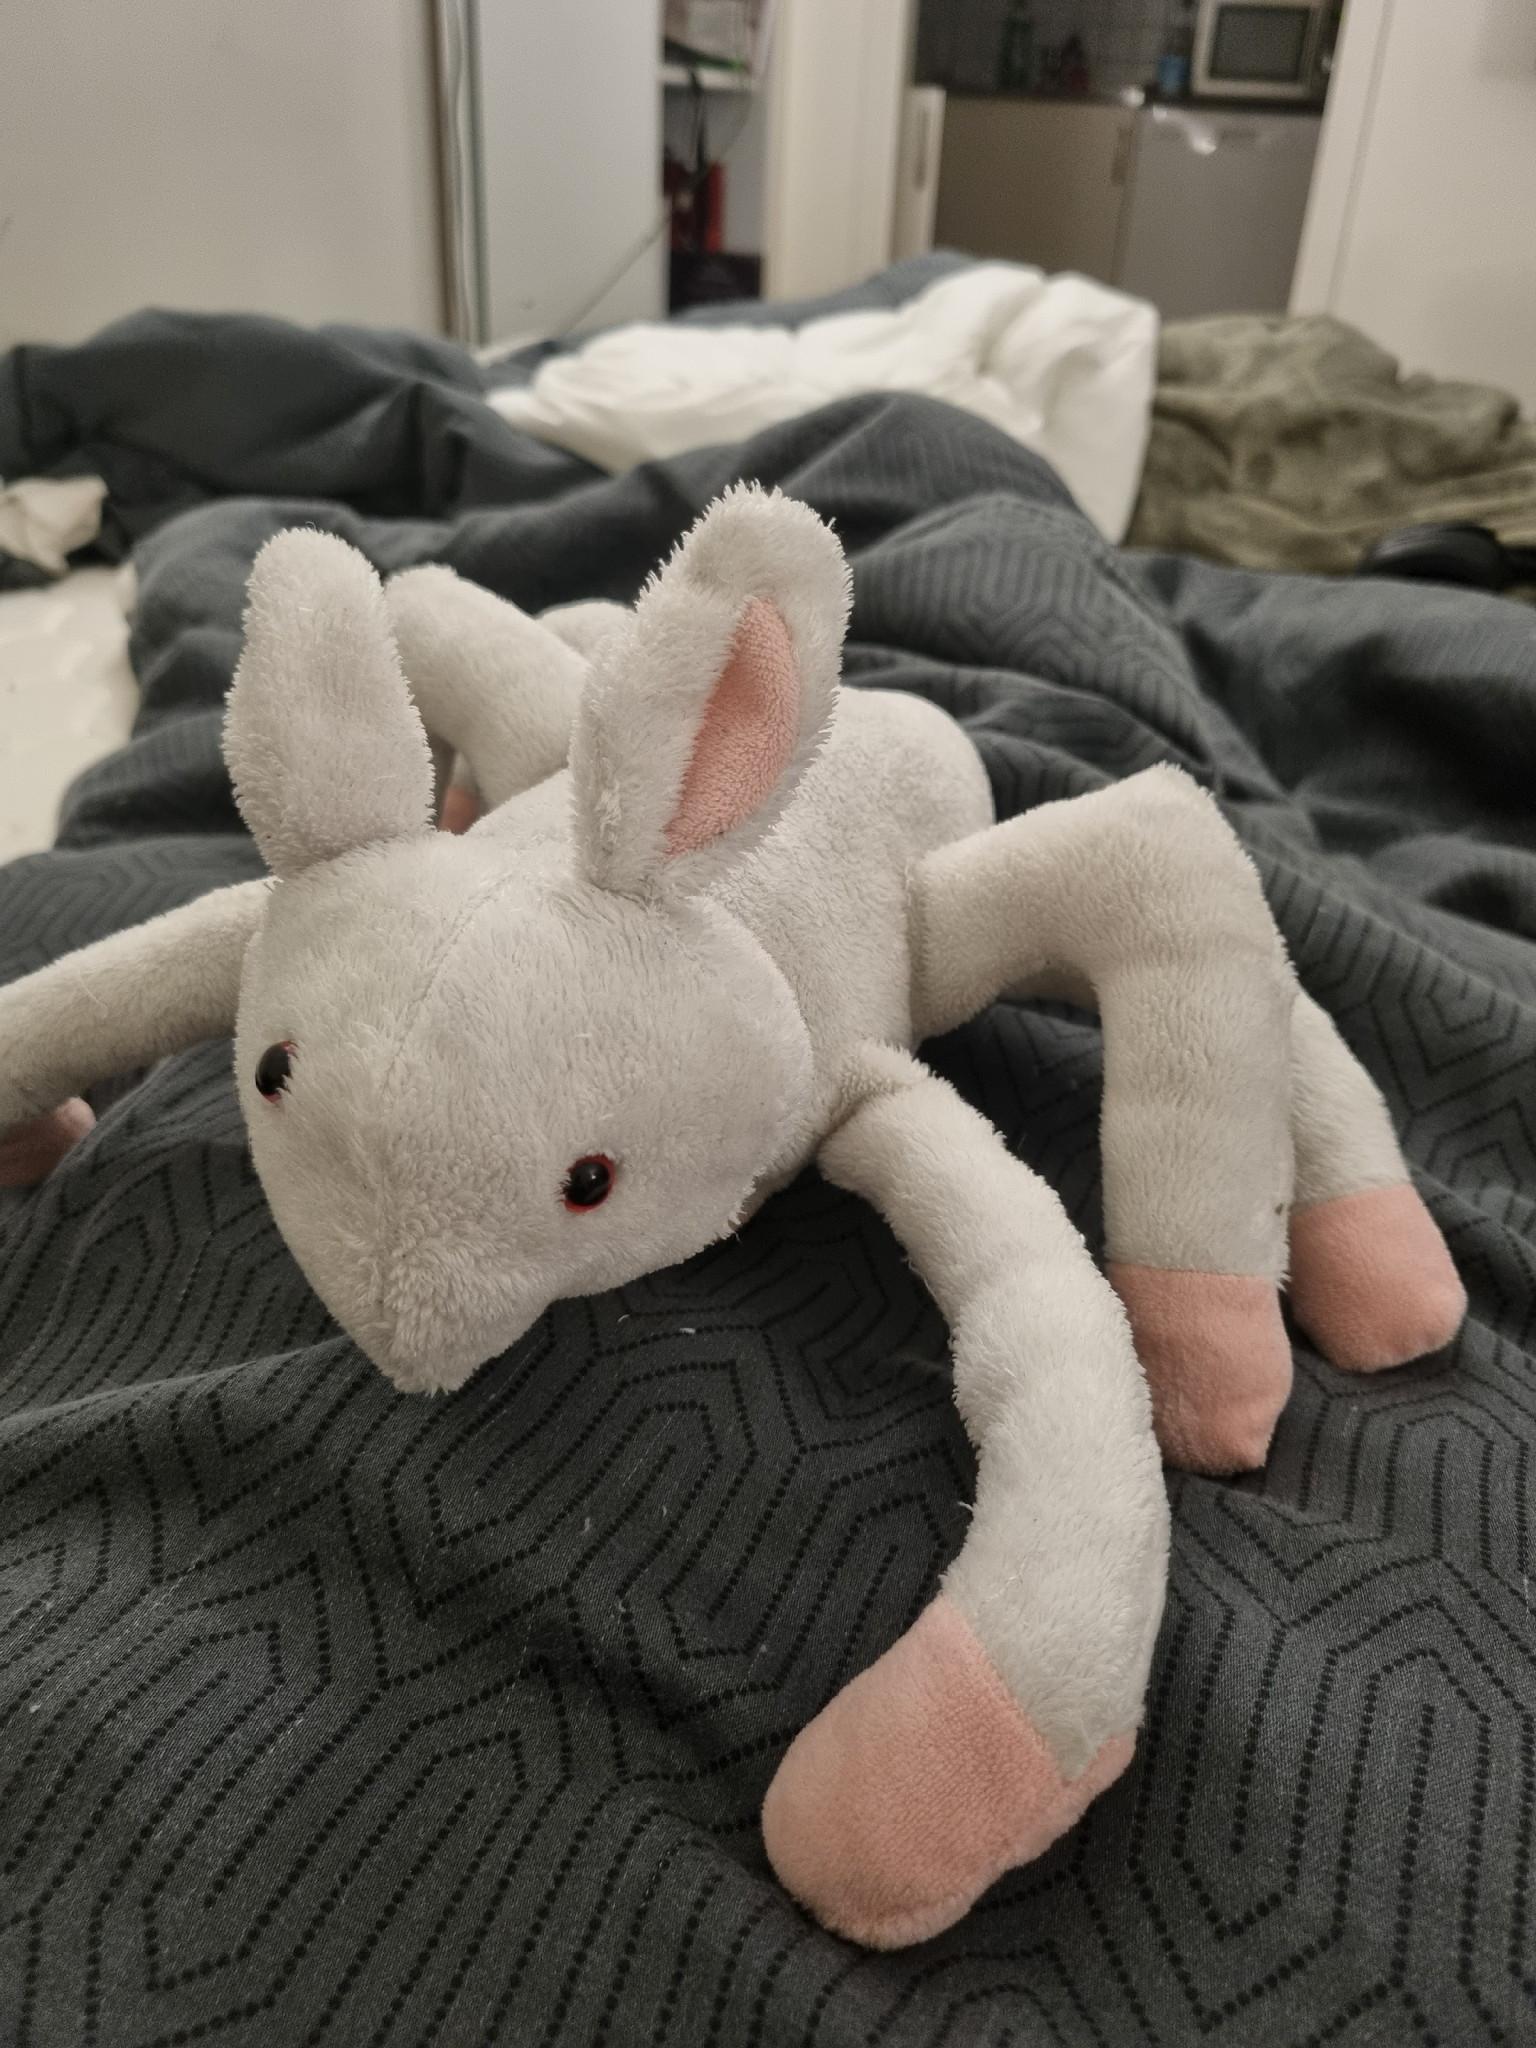 Two images of a weird six legged insect bodied white rabbit creature plush toy.